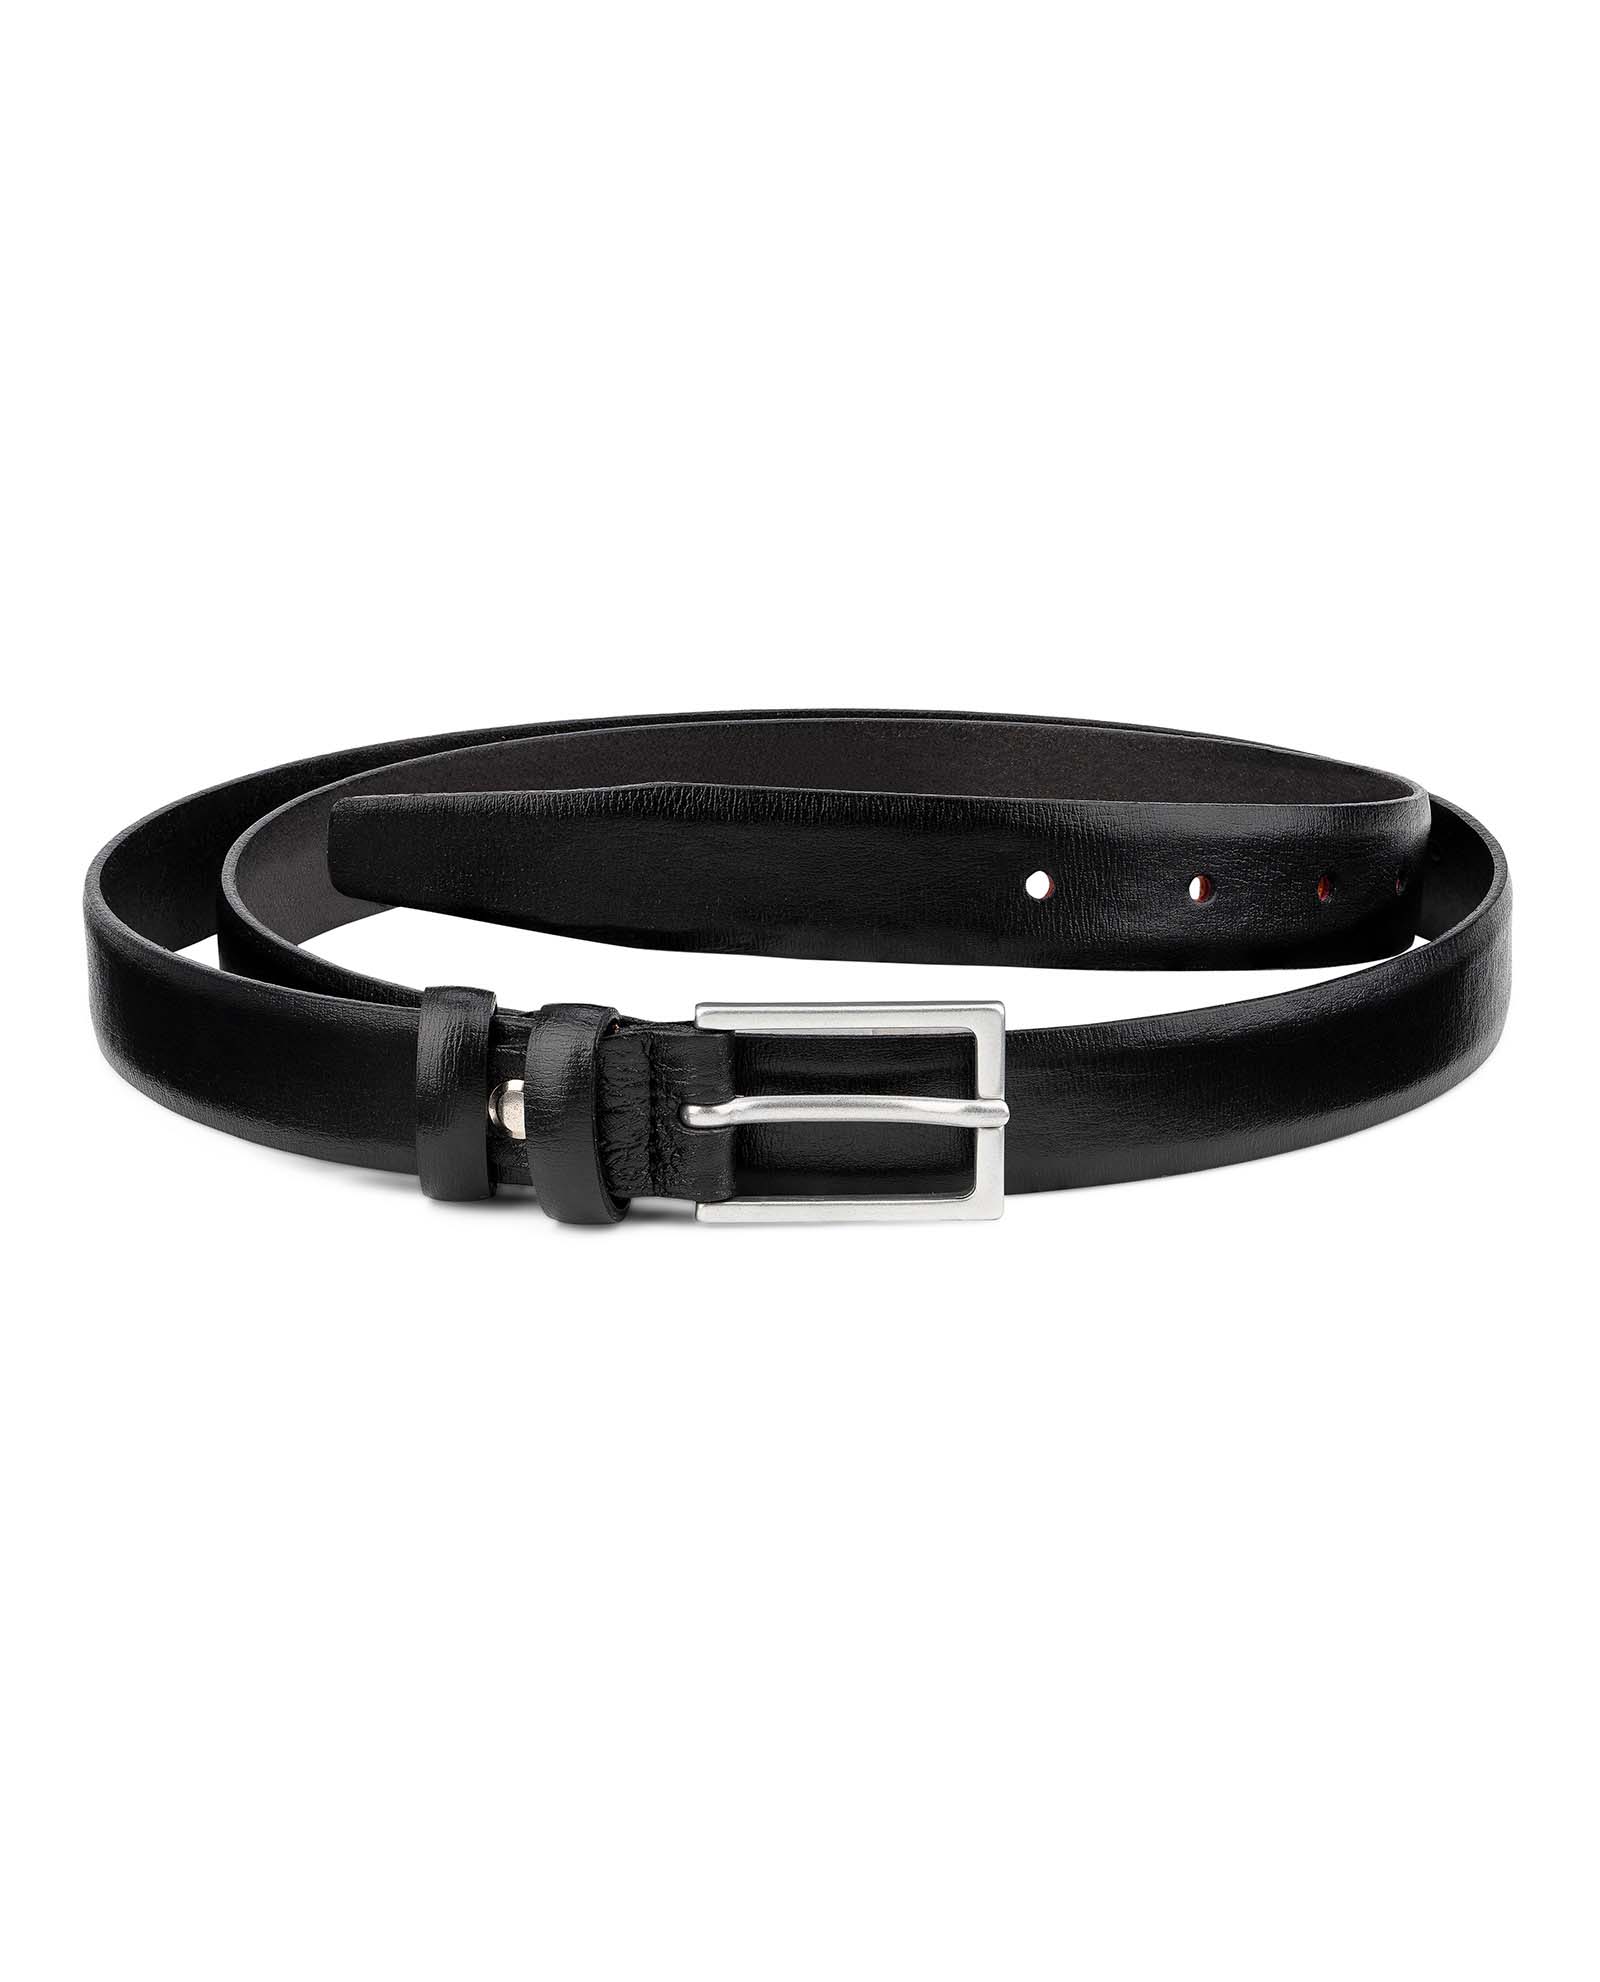 Buy Black 1 inch Leather Belt For Men | Smooth Leather | Free Shipping